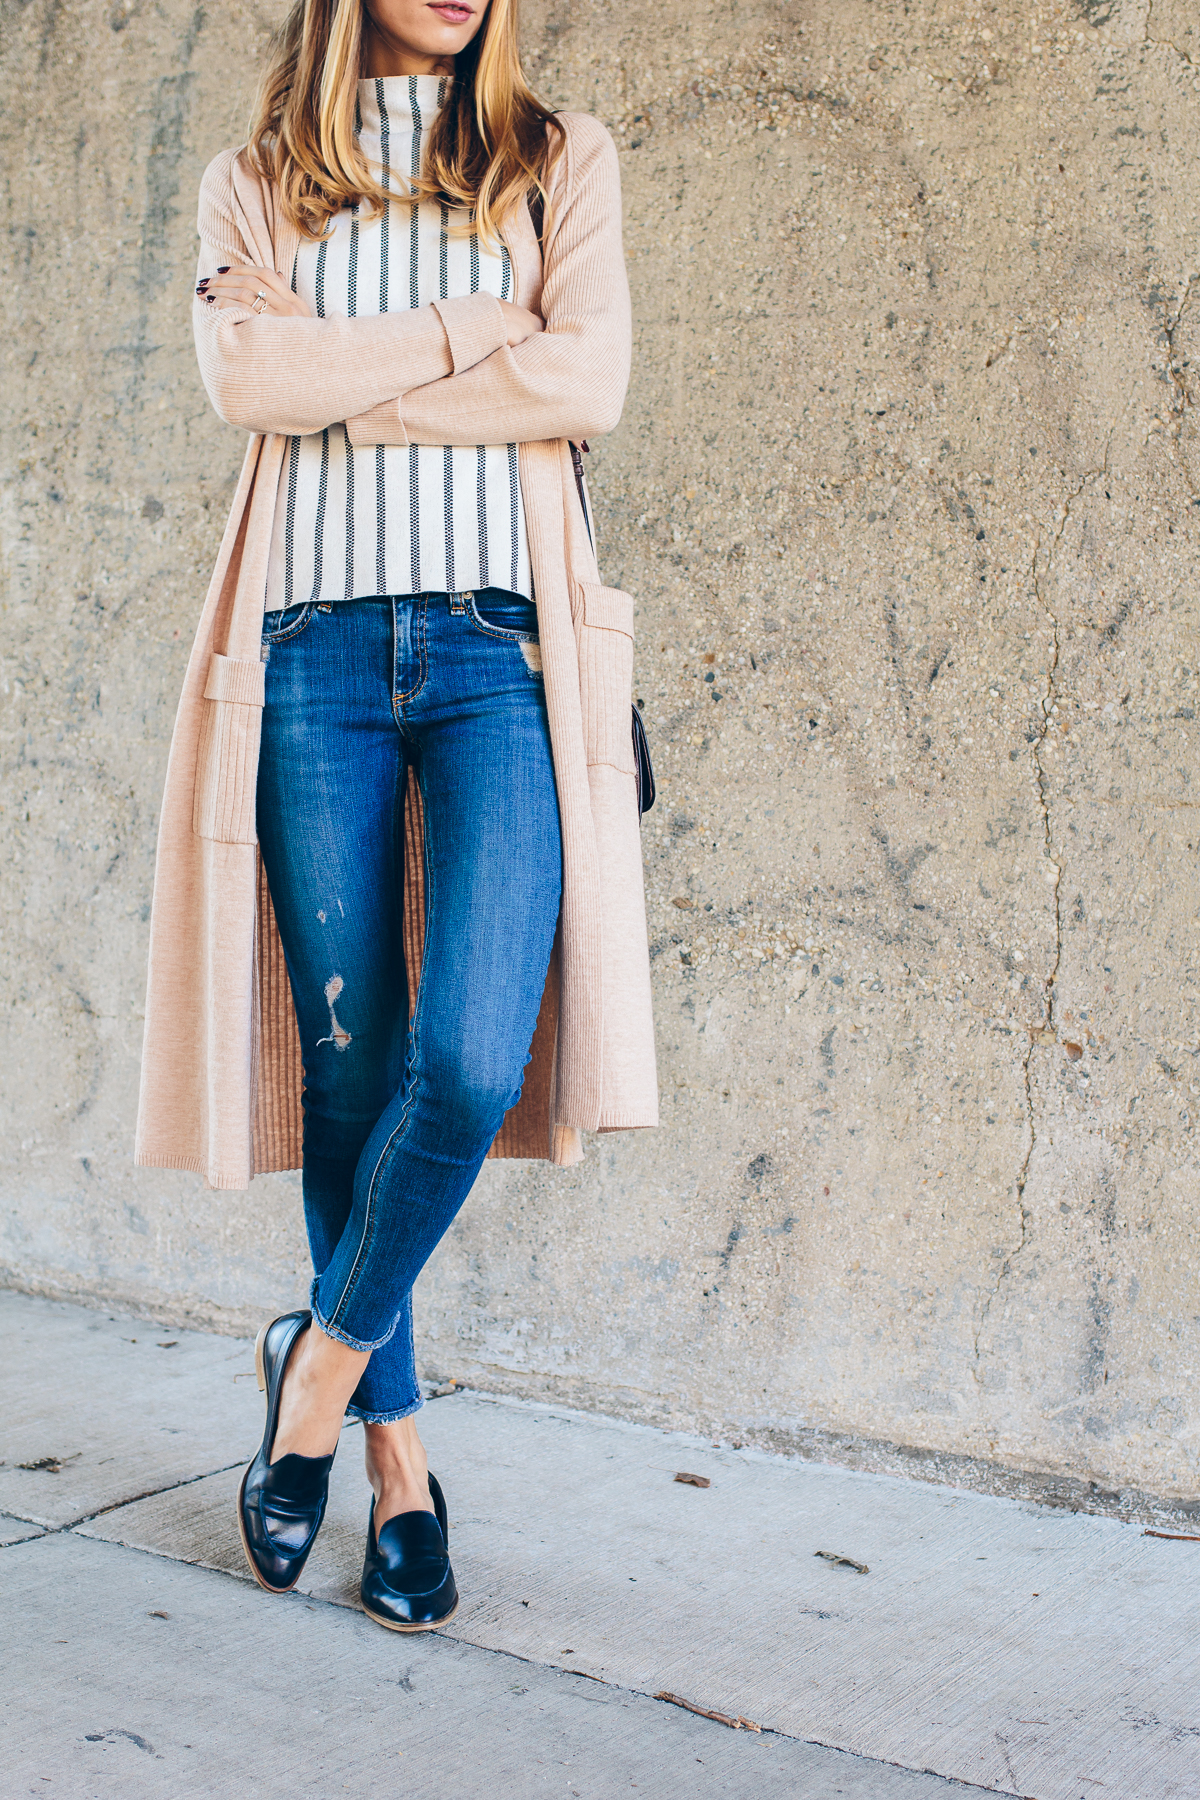 casual winter outfit, striped tee, long cardigan, loafers — via @TheFoxandShe